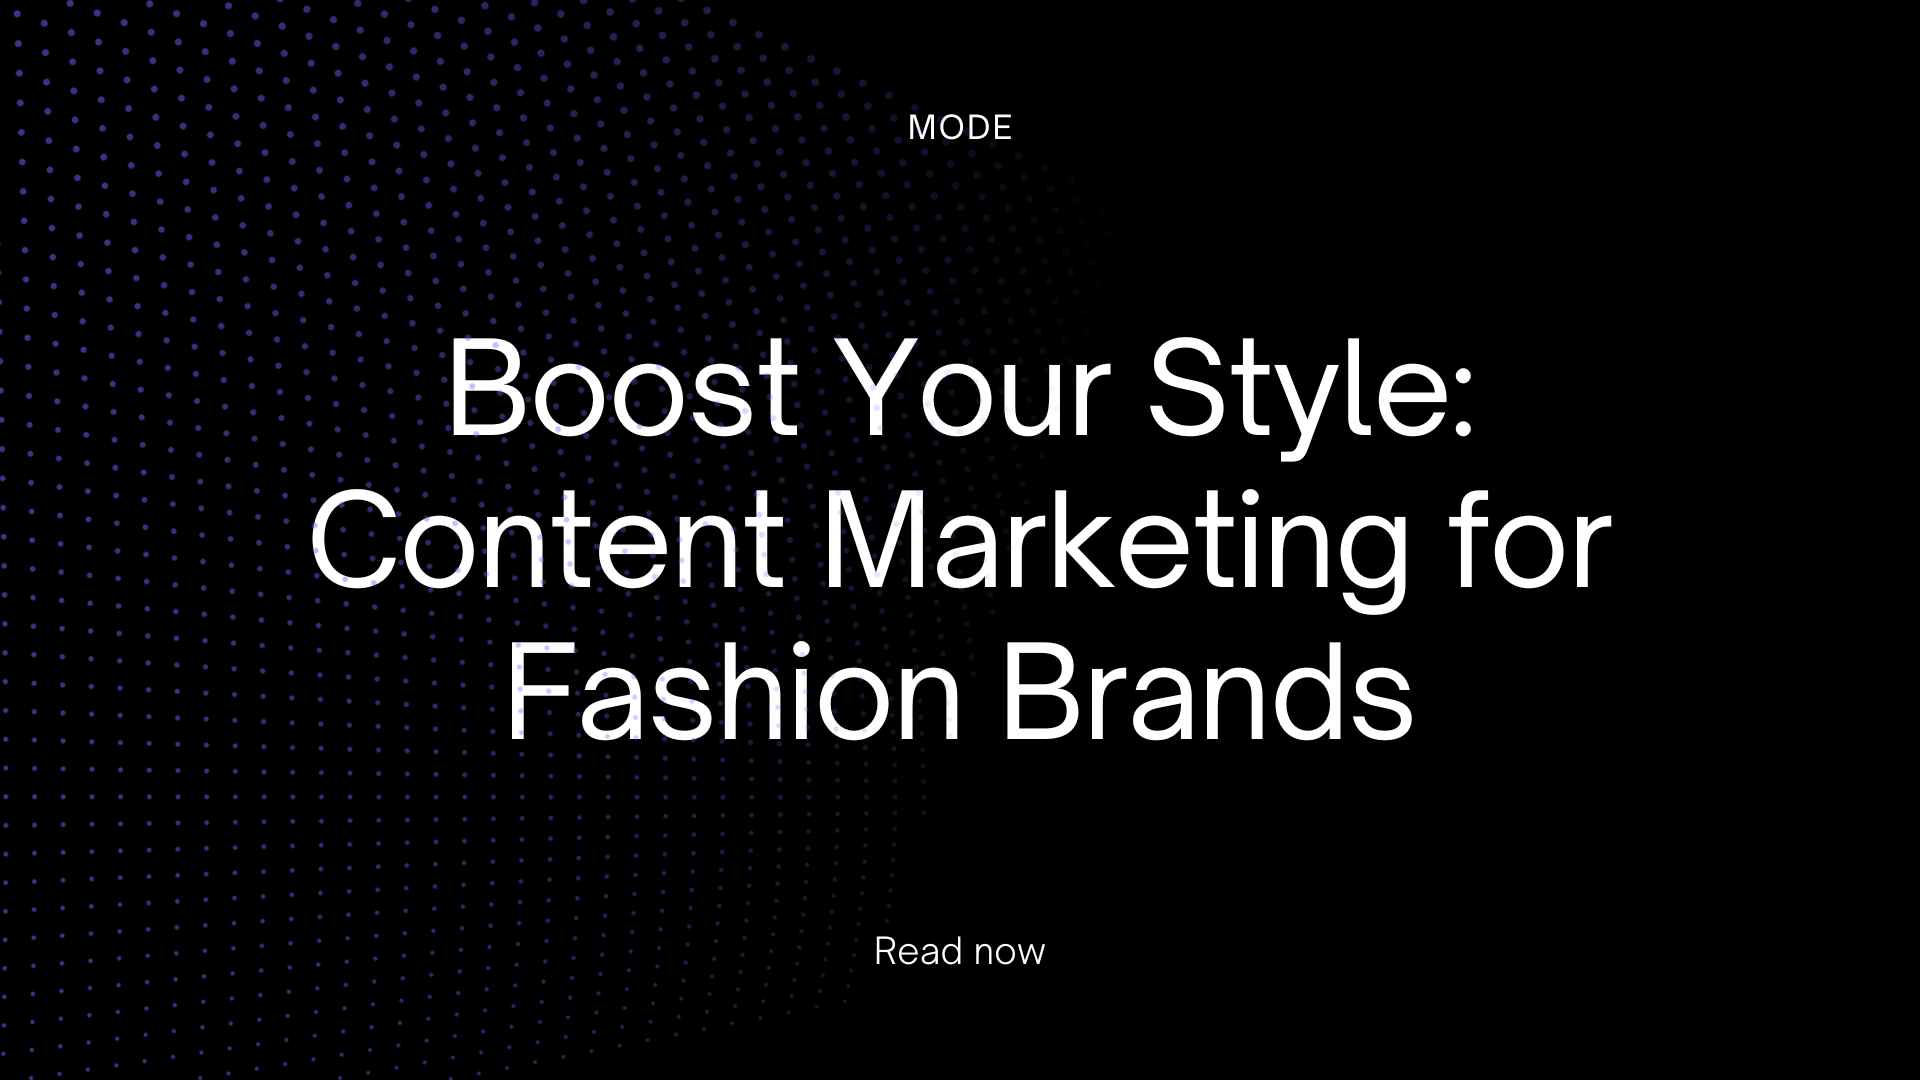 Boost Your Style: Content Marketing for Fashion Brands